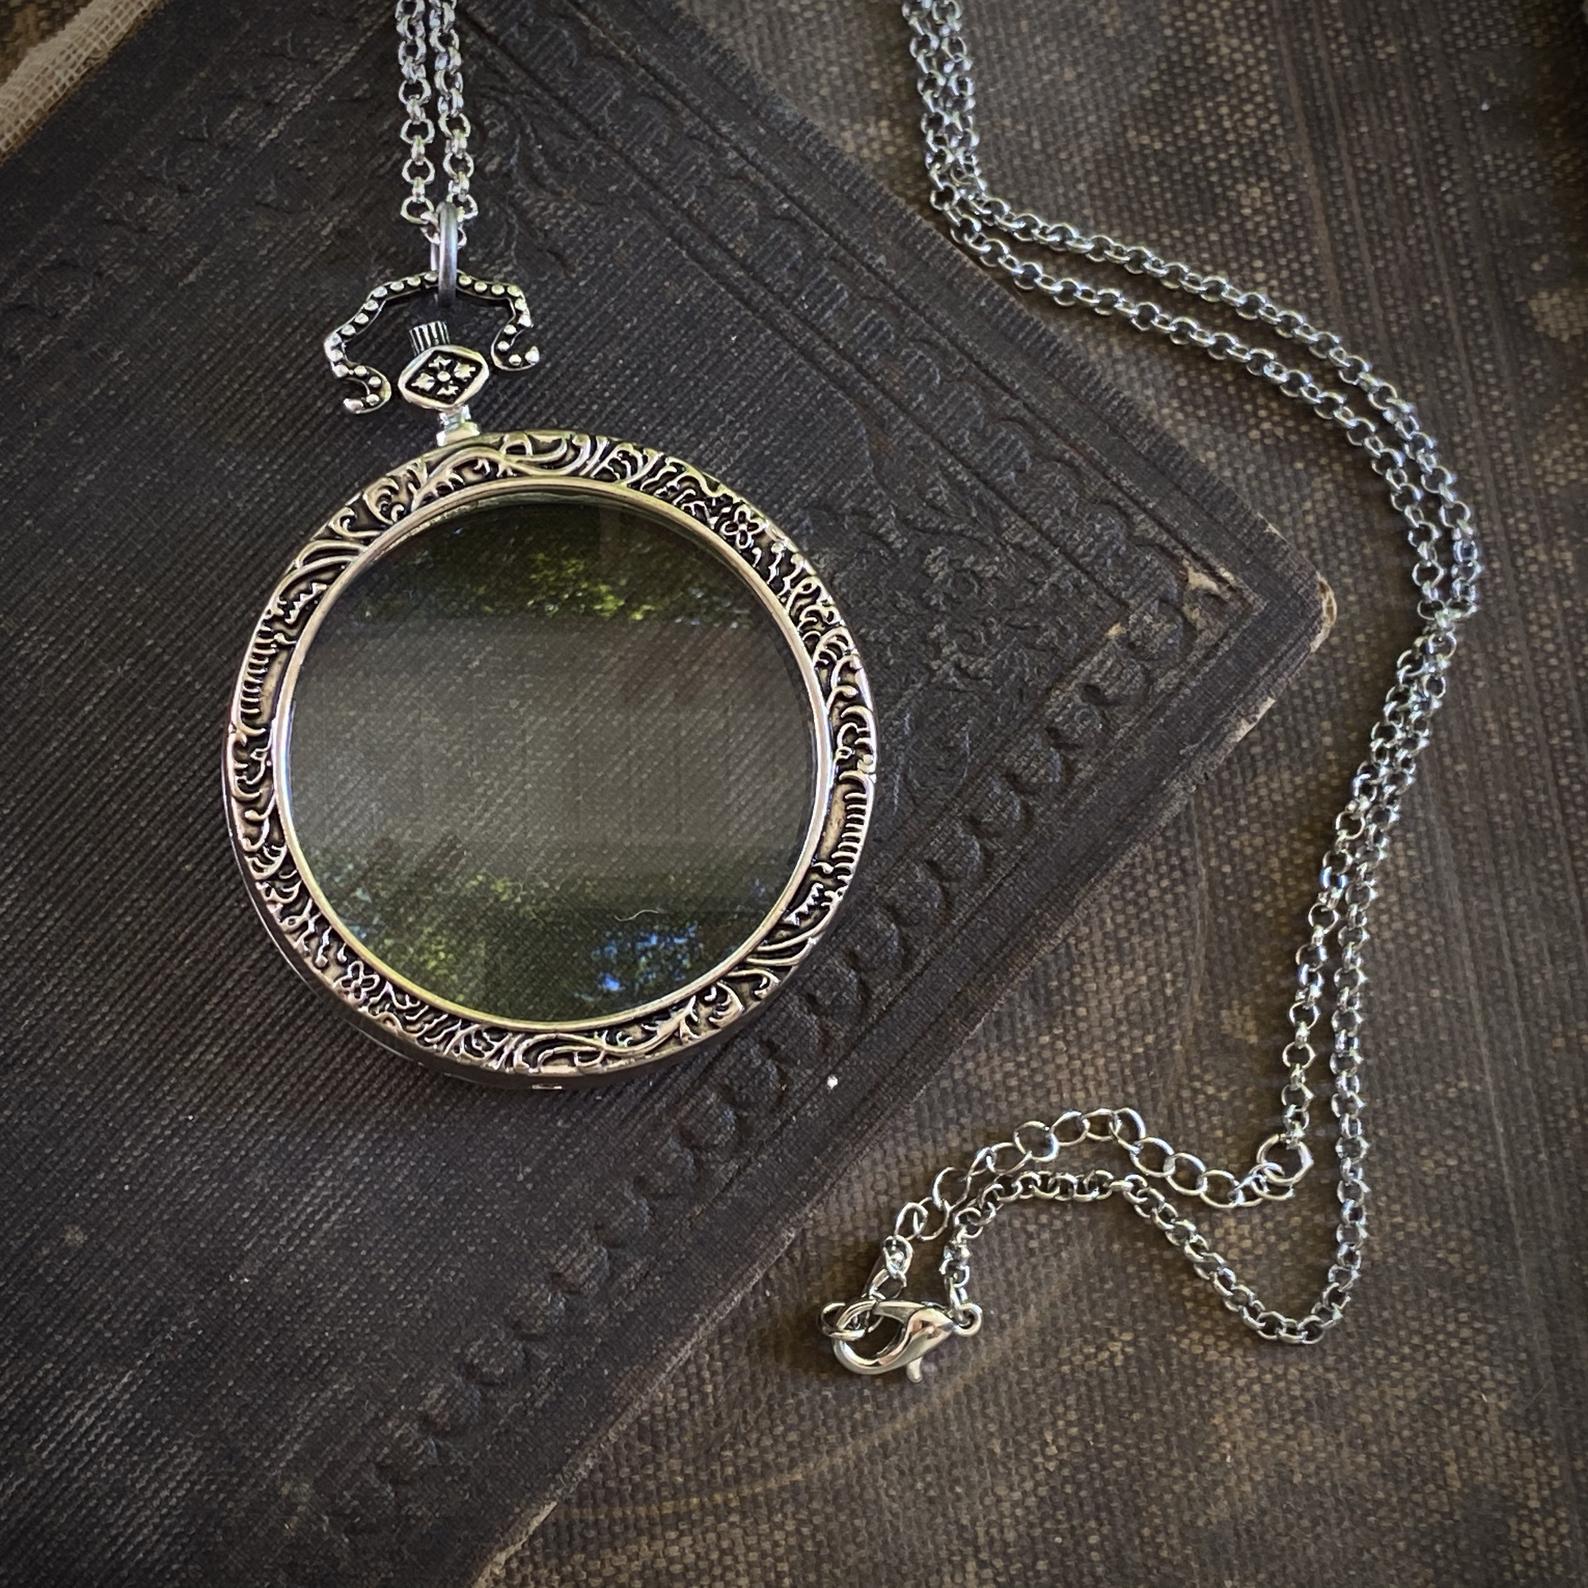 Vintage Style Magnifying Glass Pendant Necklace Victorian -   Magnifying  glass pendants, Glass pendant necklace, Vintage style necklace